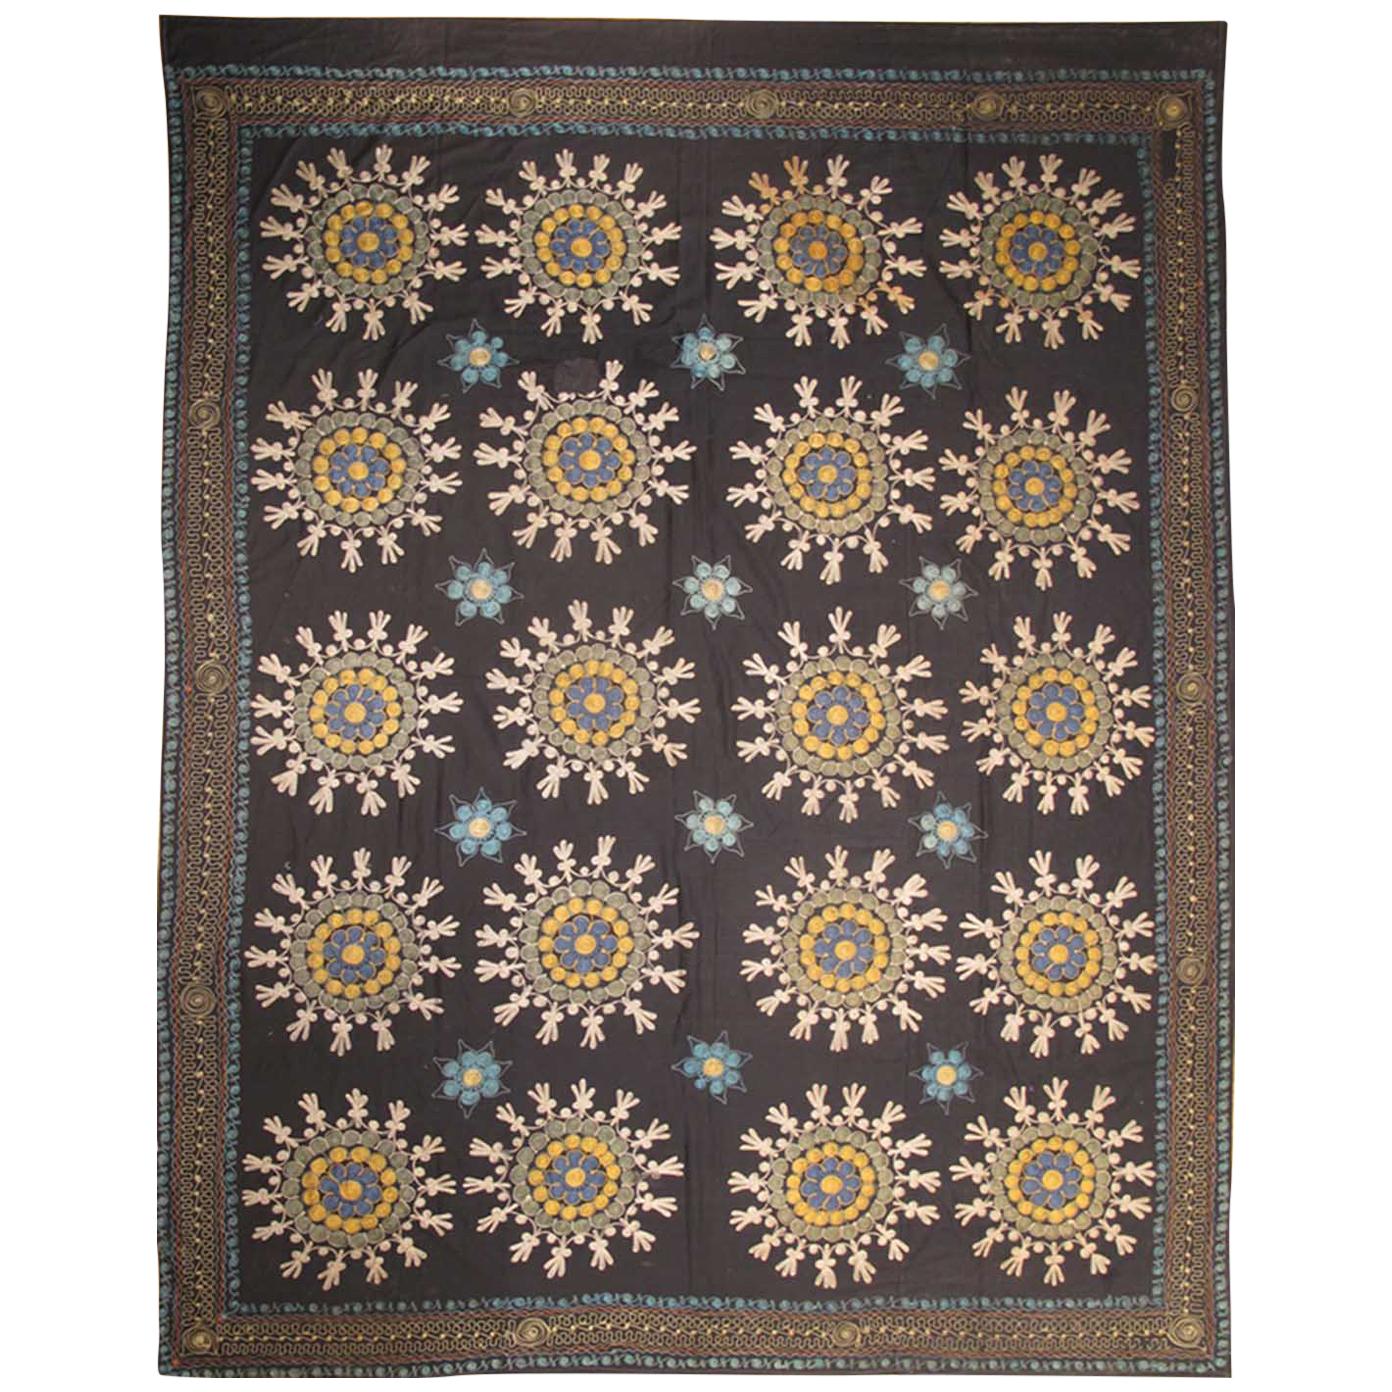 Vintage Suzani Embroidery in Black Background with Yellow, Blues and Taupe